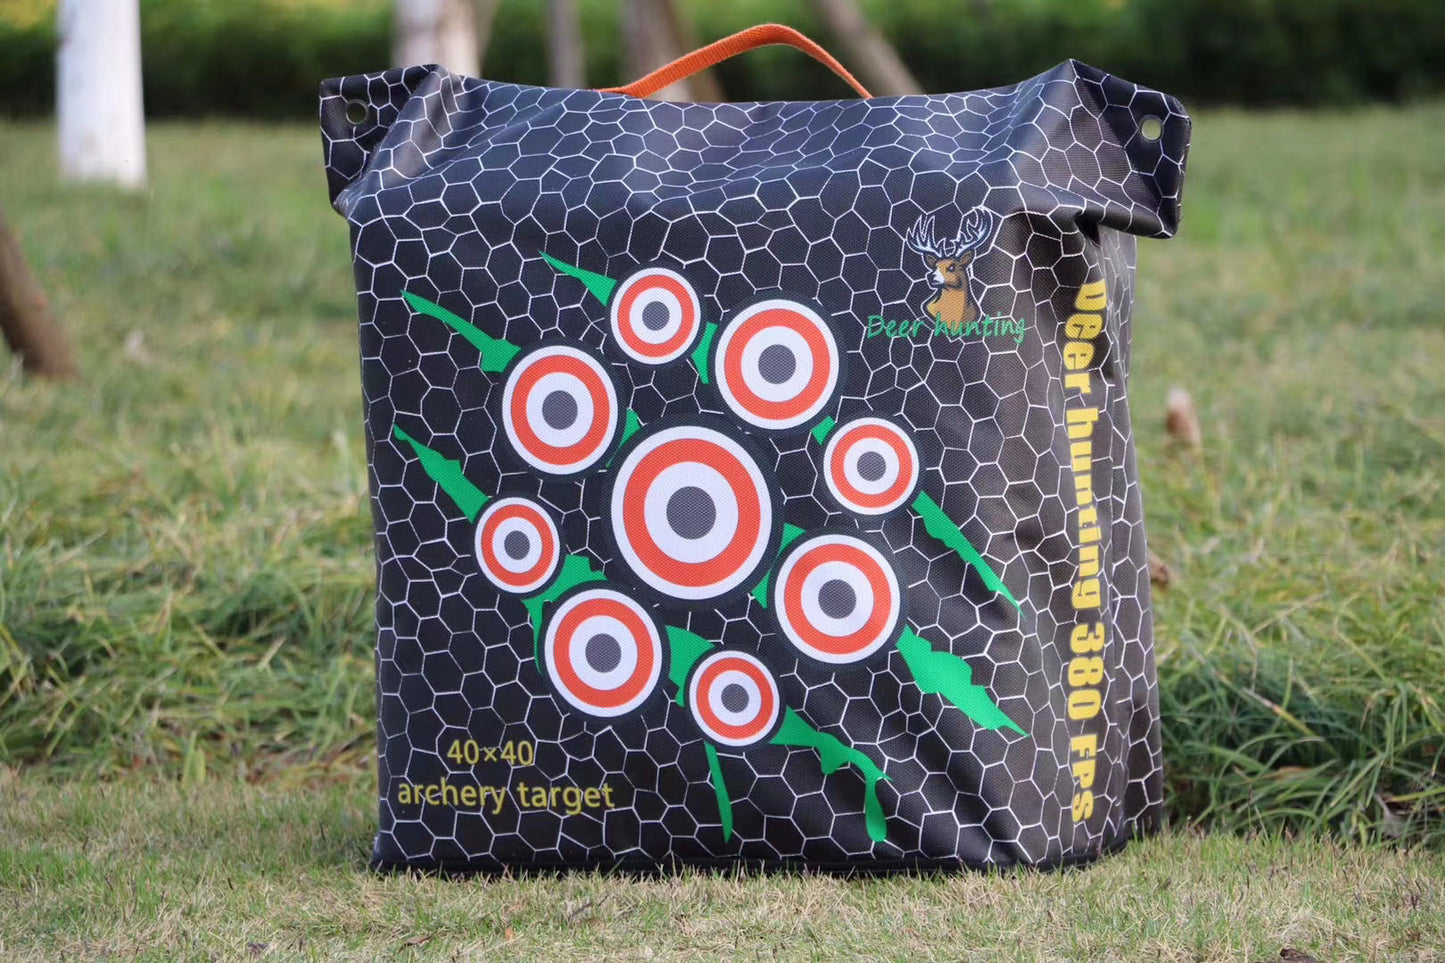 Deerhunting 380FPS Stopping Power Hunting Archery Target Compound Recurve Bow 3D Archery